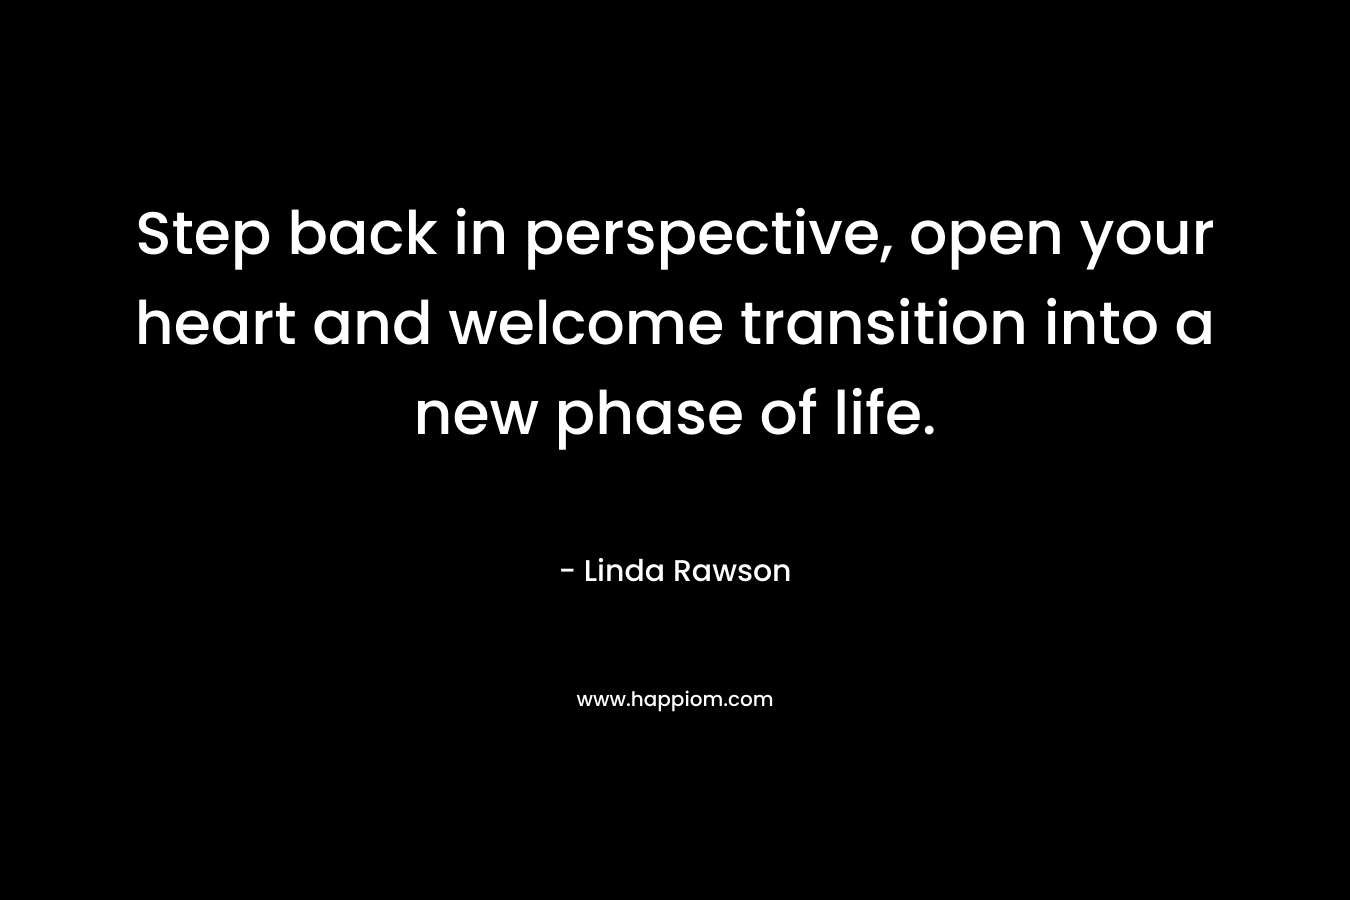 Step back in perspective, open your heart and welcome transition into a new phase of life. – Linda Rawson